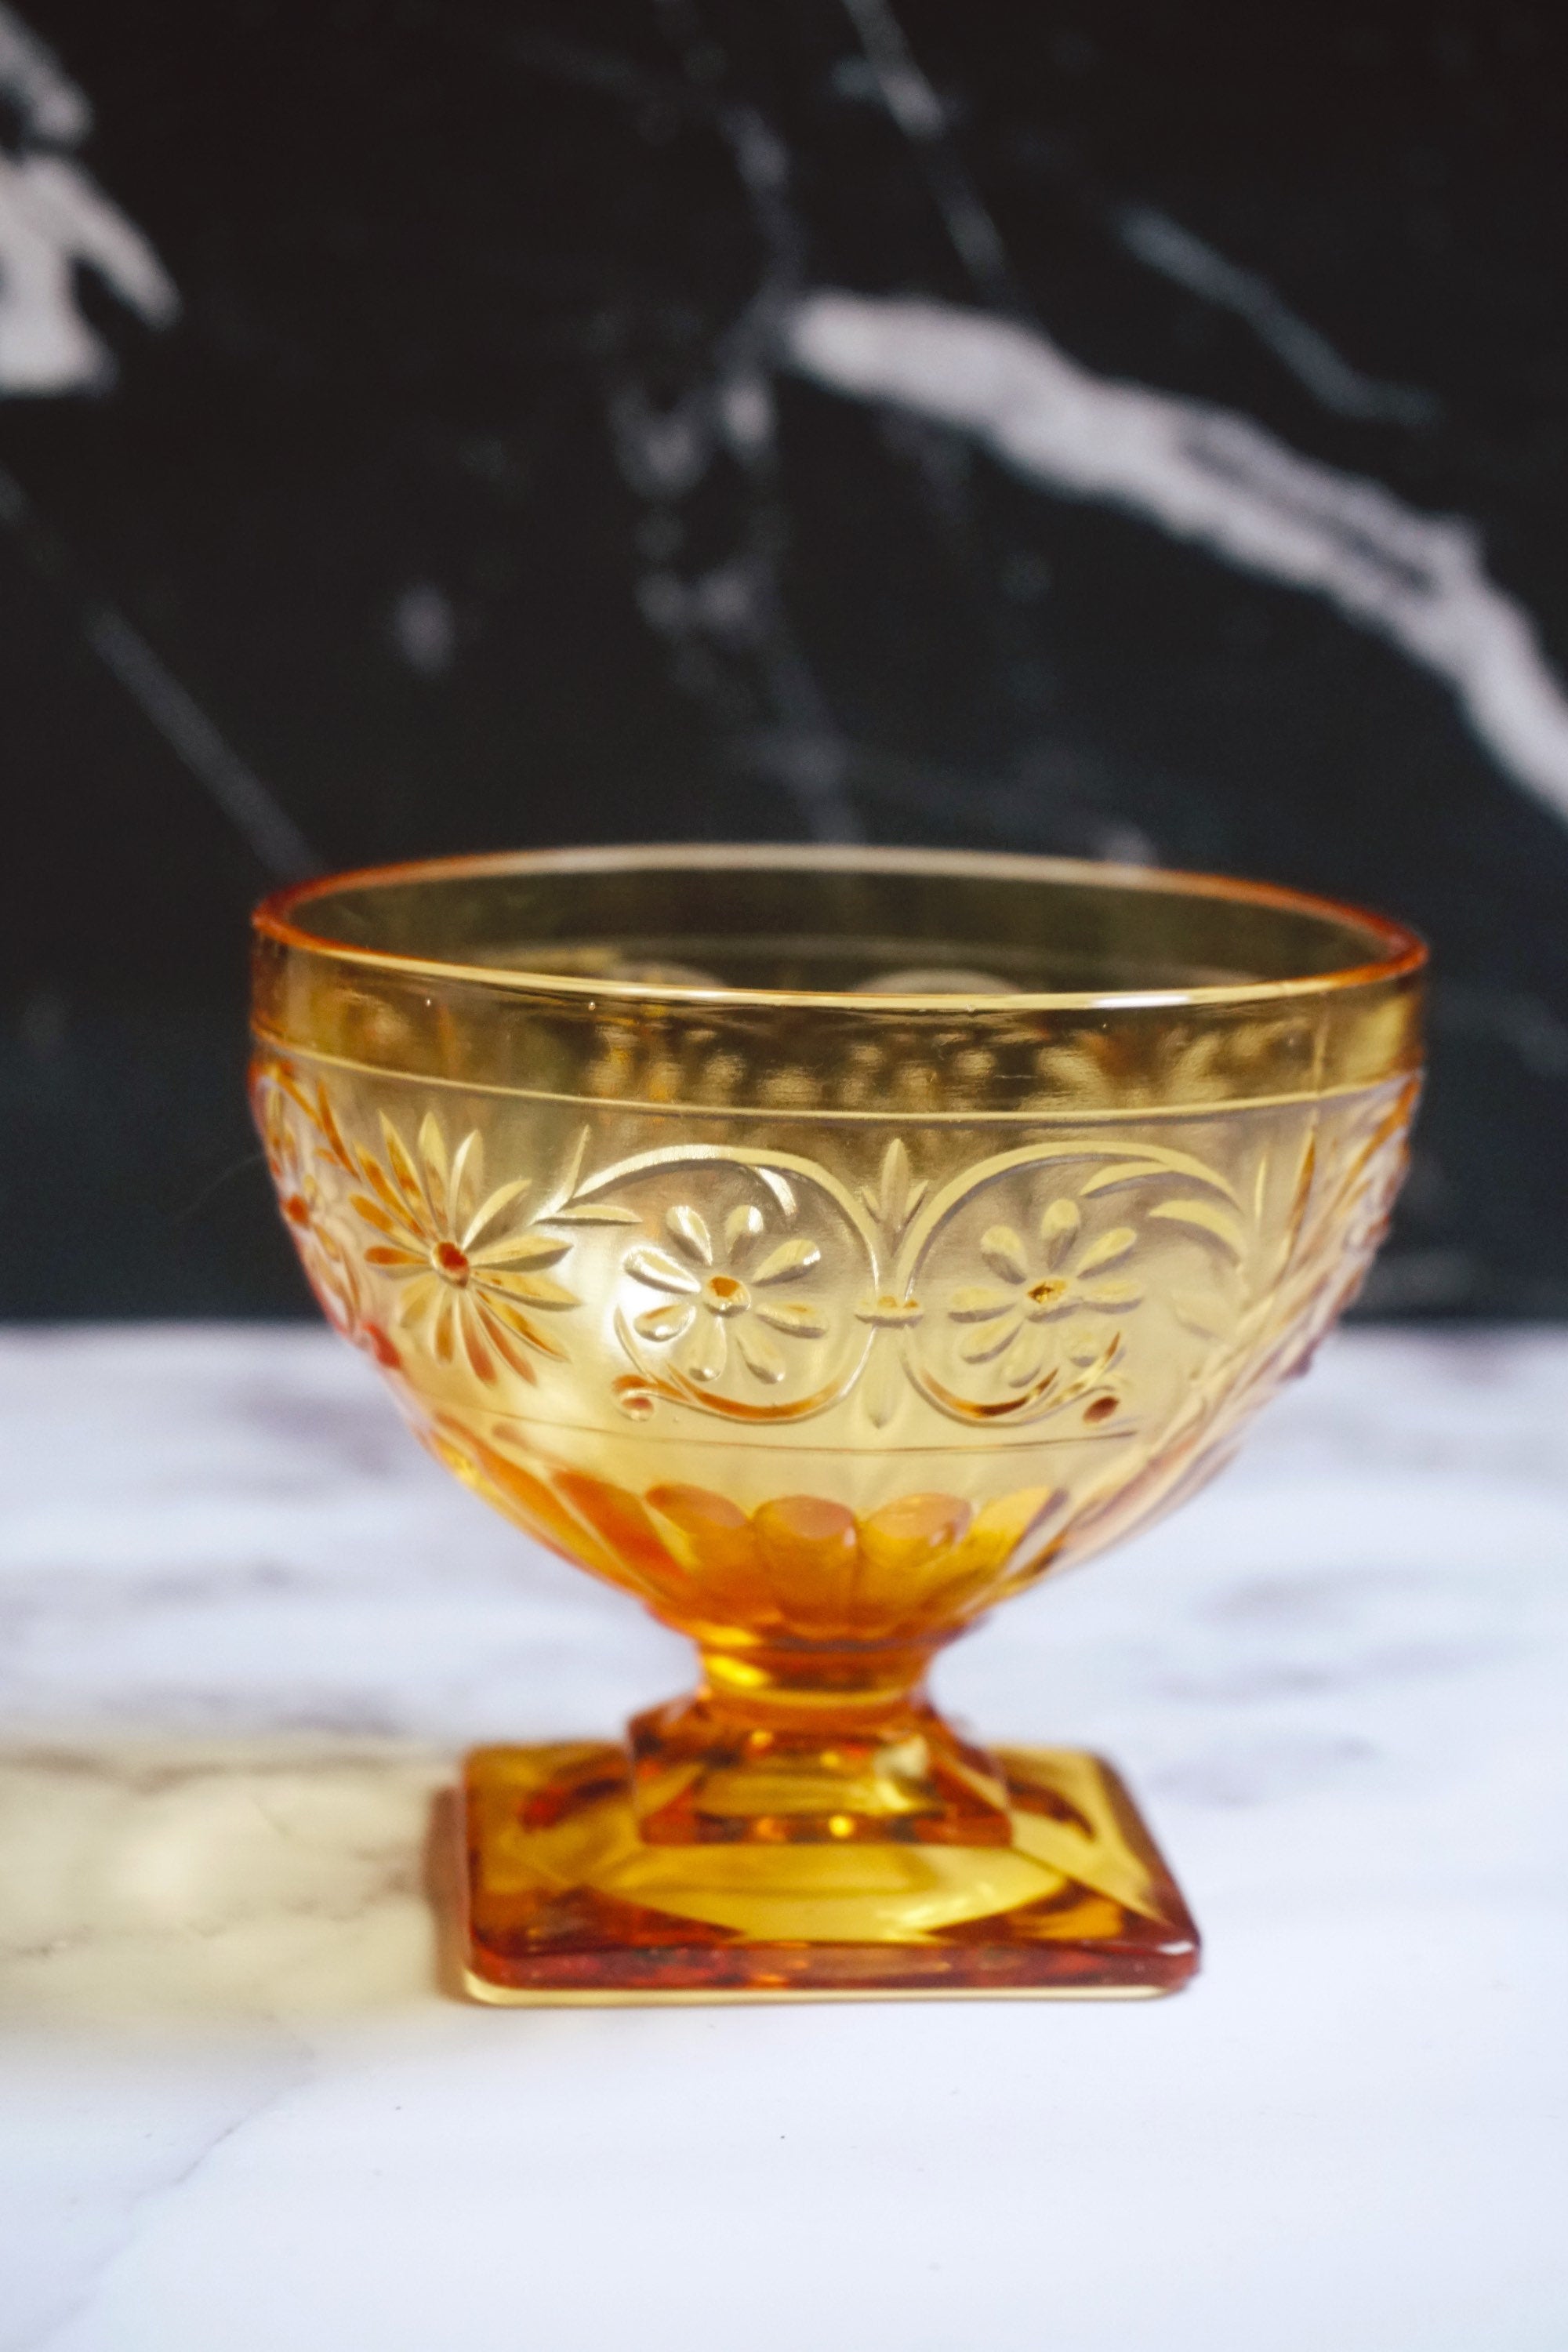 Vintage Amber Depression Glass Set In Daisy Pattern | Cup, Plate, Bowl, Creamer, Goblet, Serving Dish by Indiana Glass